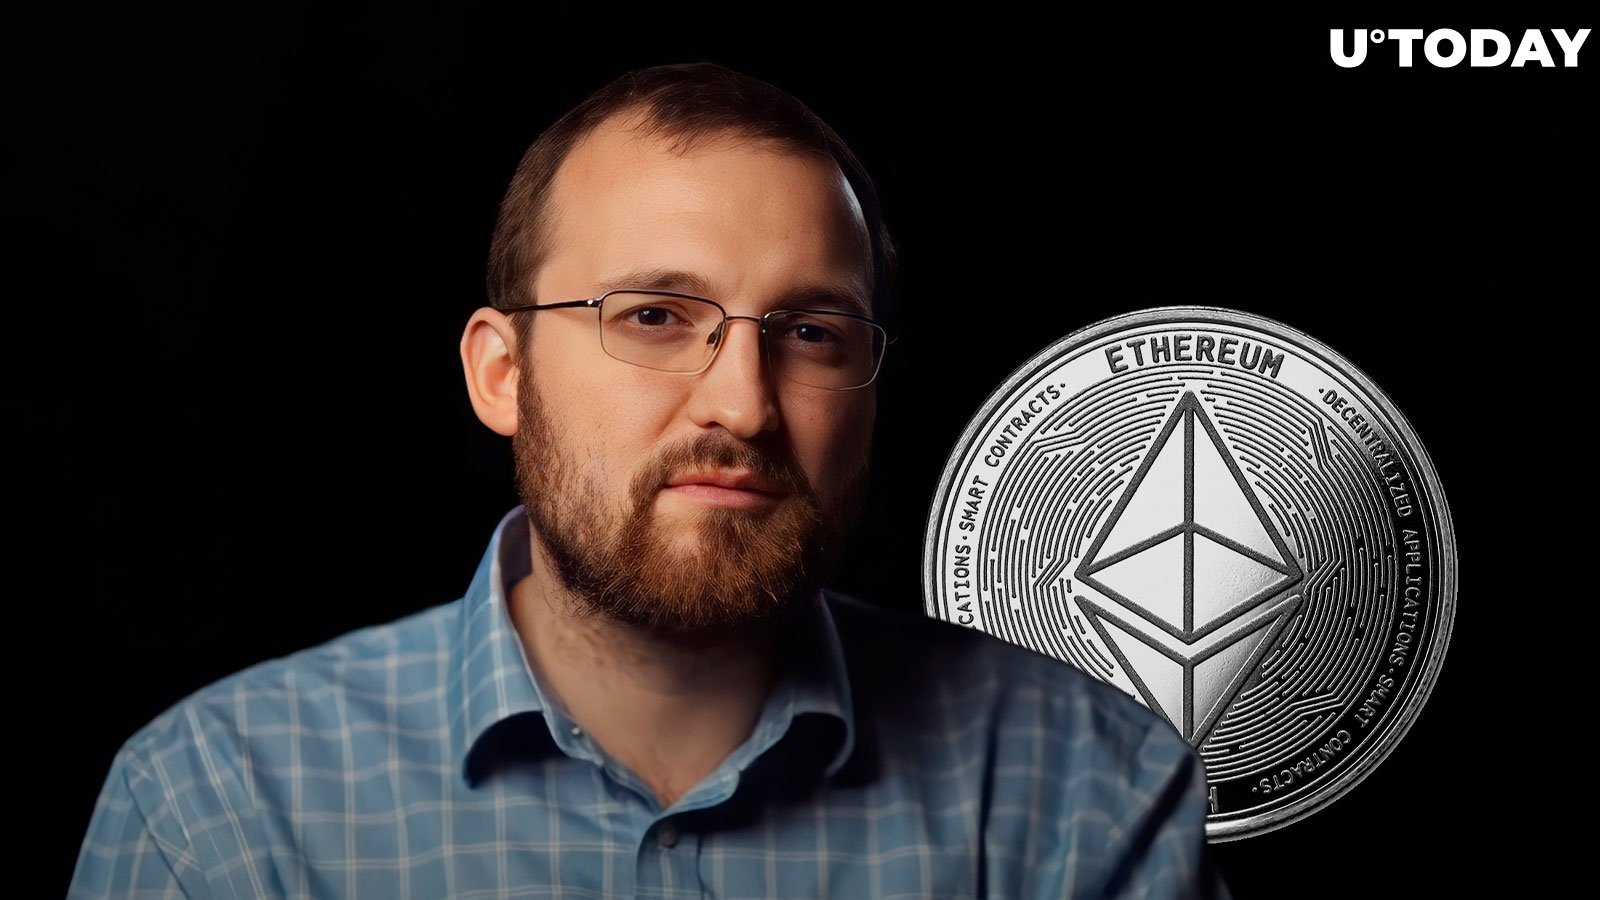 Cardano Founder Champions Superior Transaction Costs Compared to Ethereum